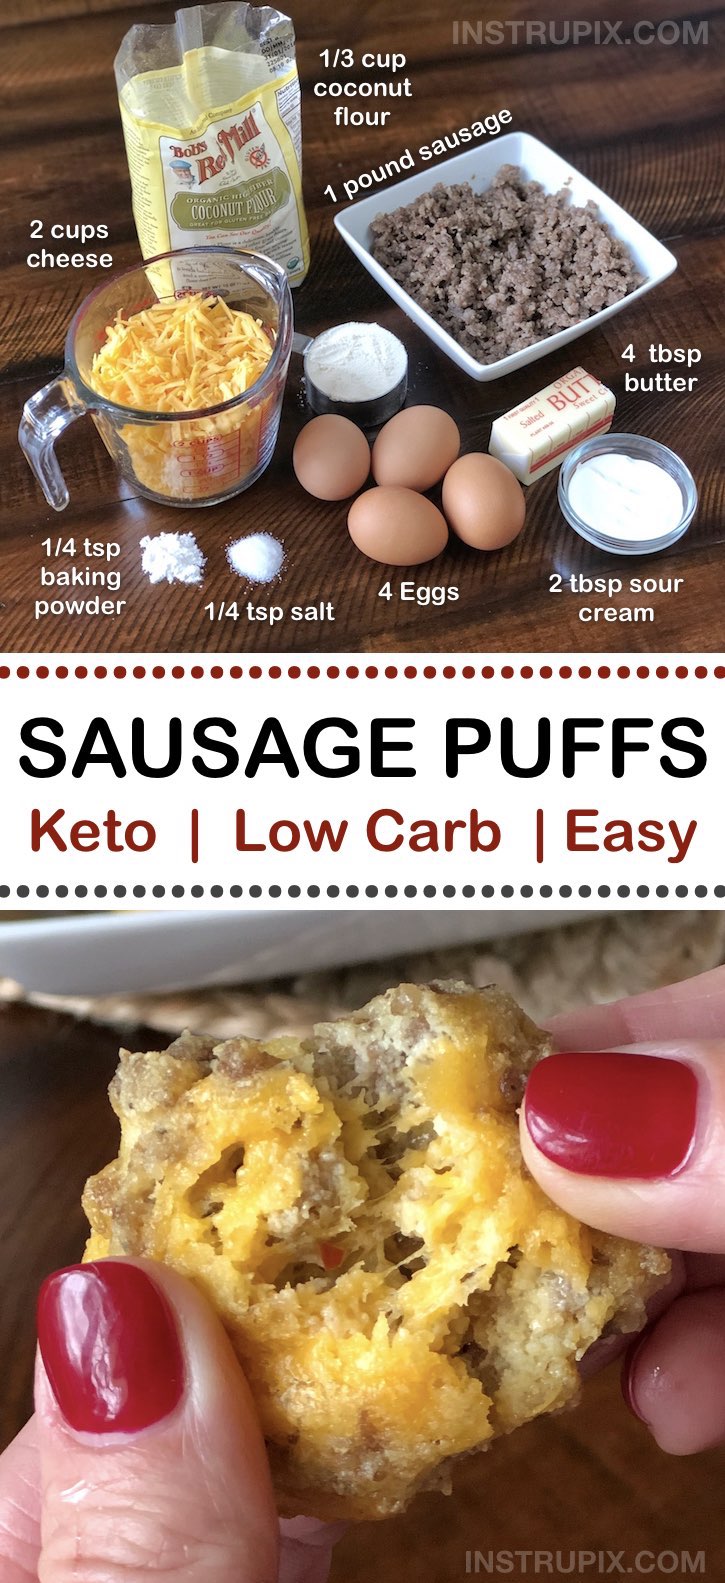 Cheesy Sausage Balls Recipe made with coconut flour! | An easy low carb and keto recipe idea for on the go! They're perfect for breakfast and snacks to take to work. Easy Ketogenic Diet, Atkins and Diabetic Recipe for weight loss. Looking for keto friendly and low carb recipes full of flavor? Your search ends here. Instrupix.com